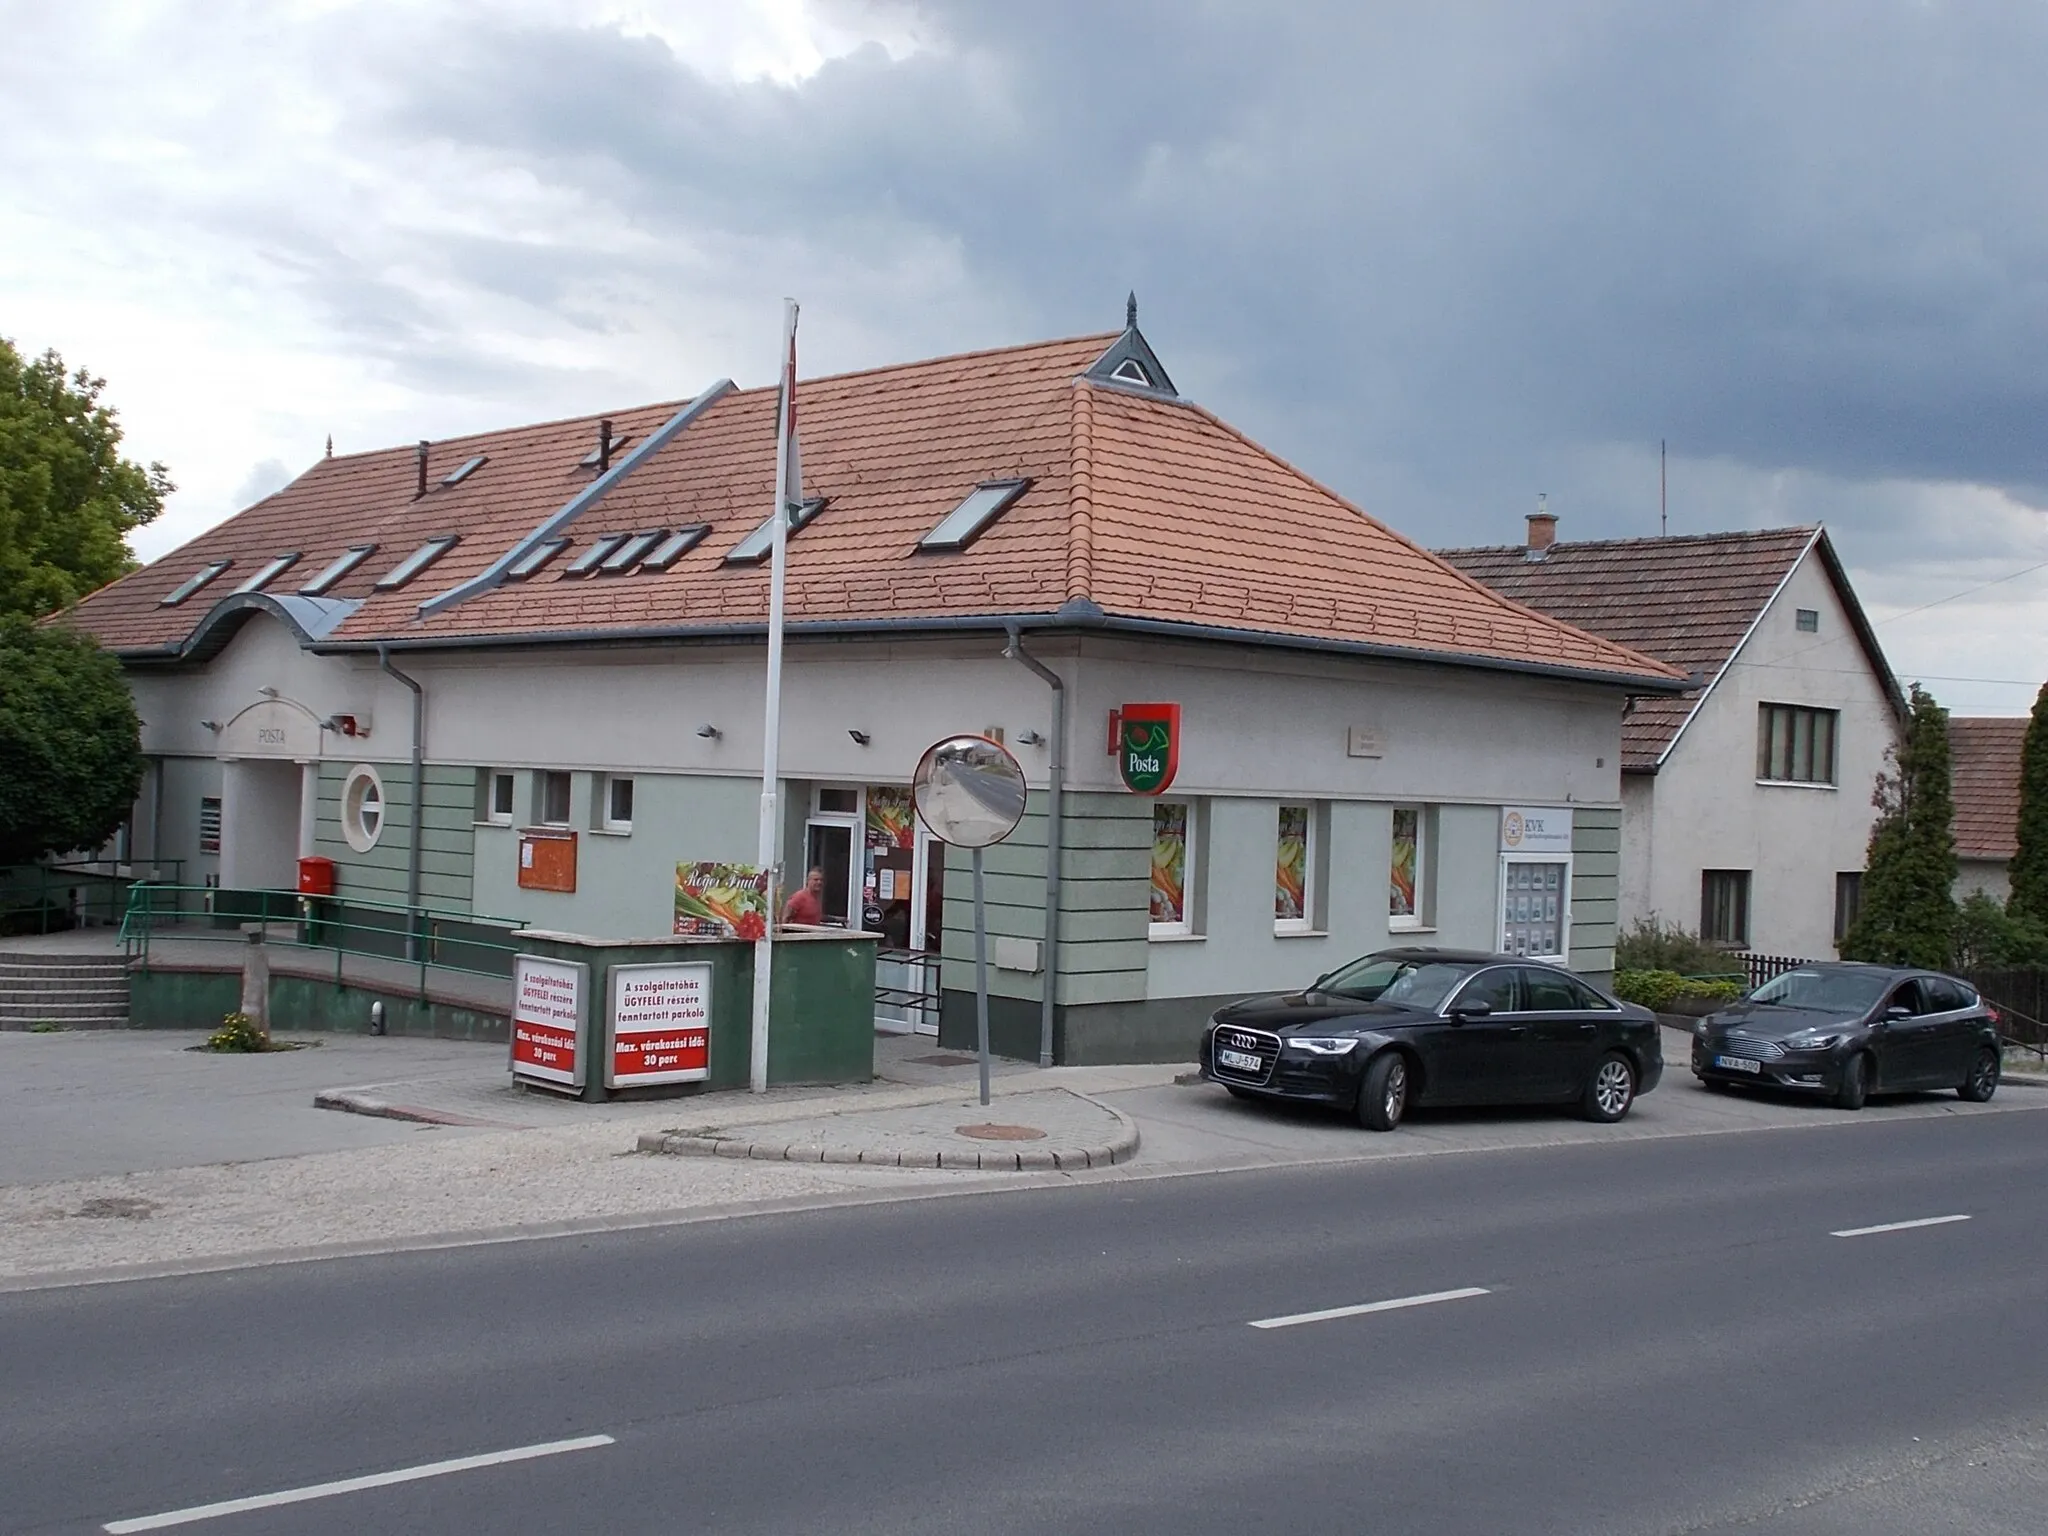 Photo showing: : Post office (built 2007) - 10 Fóti Road (Route 2101), Mogyoród, Pest County, Hungary.